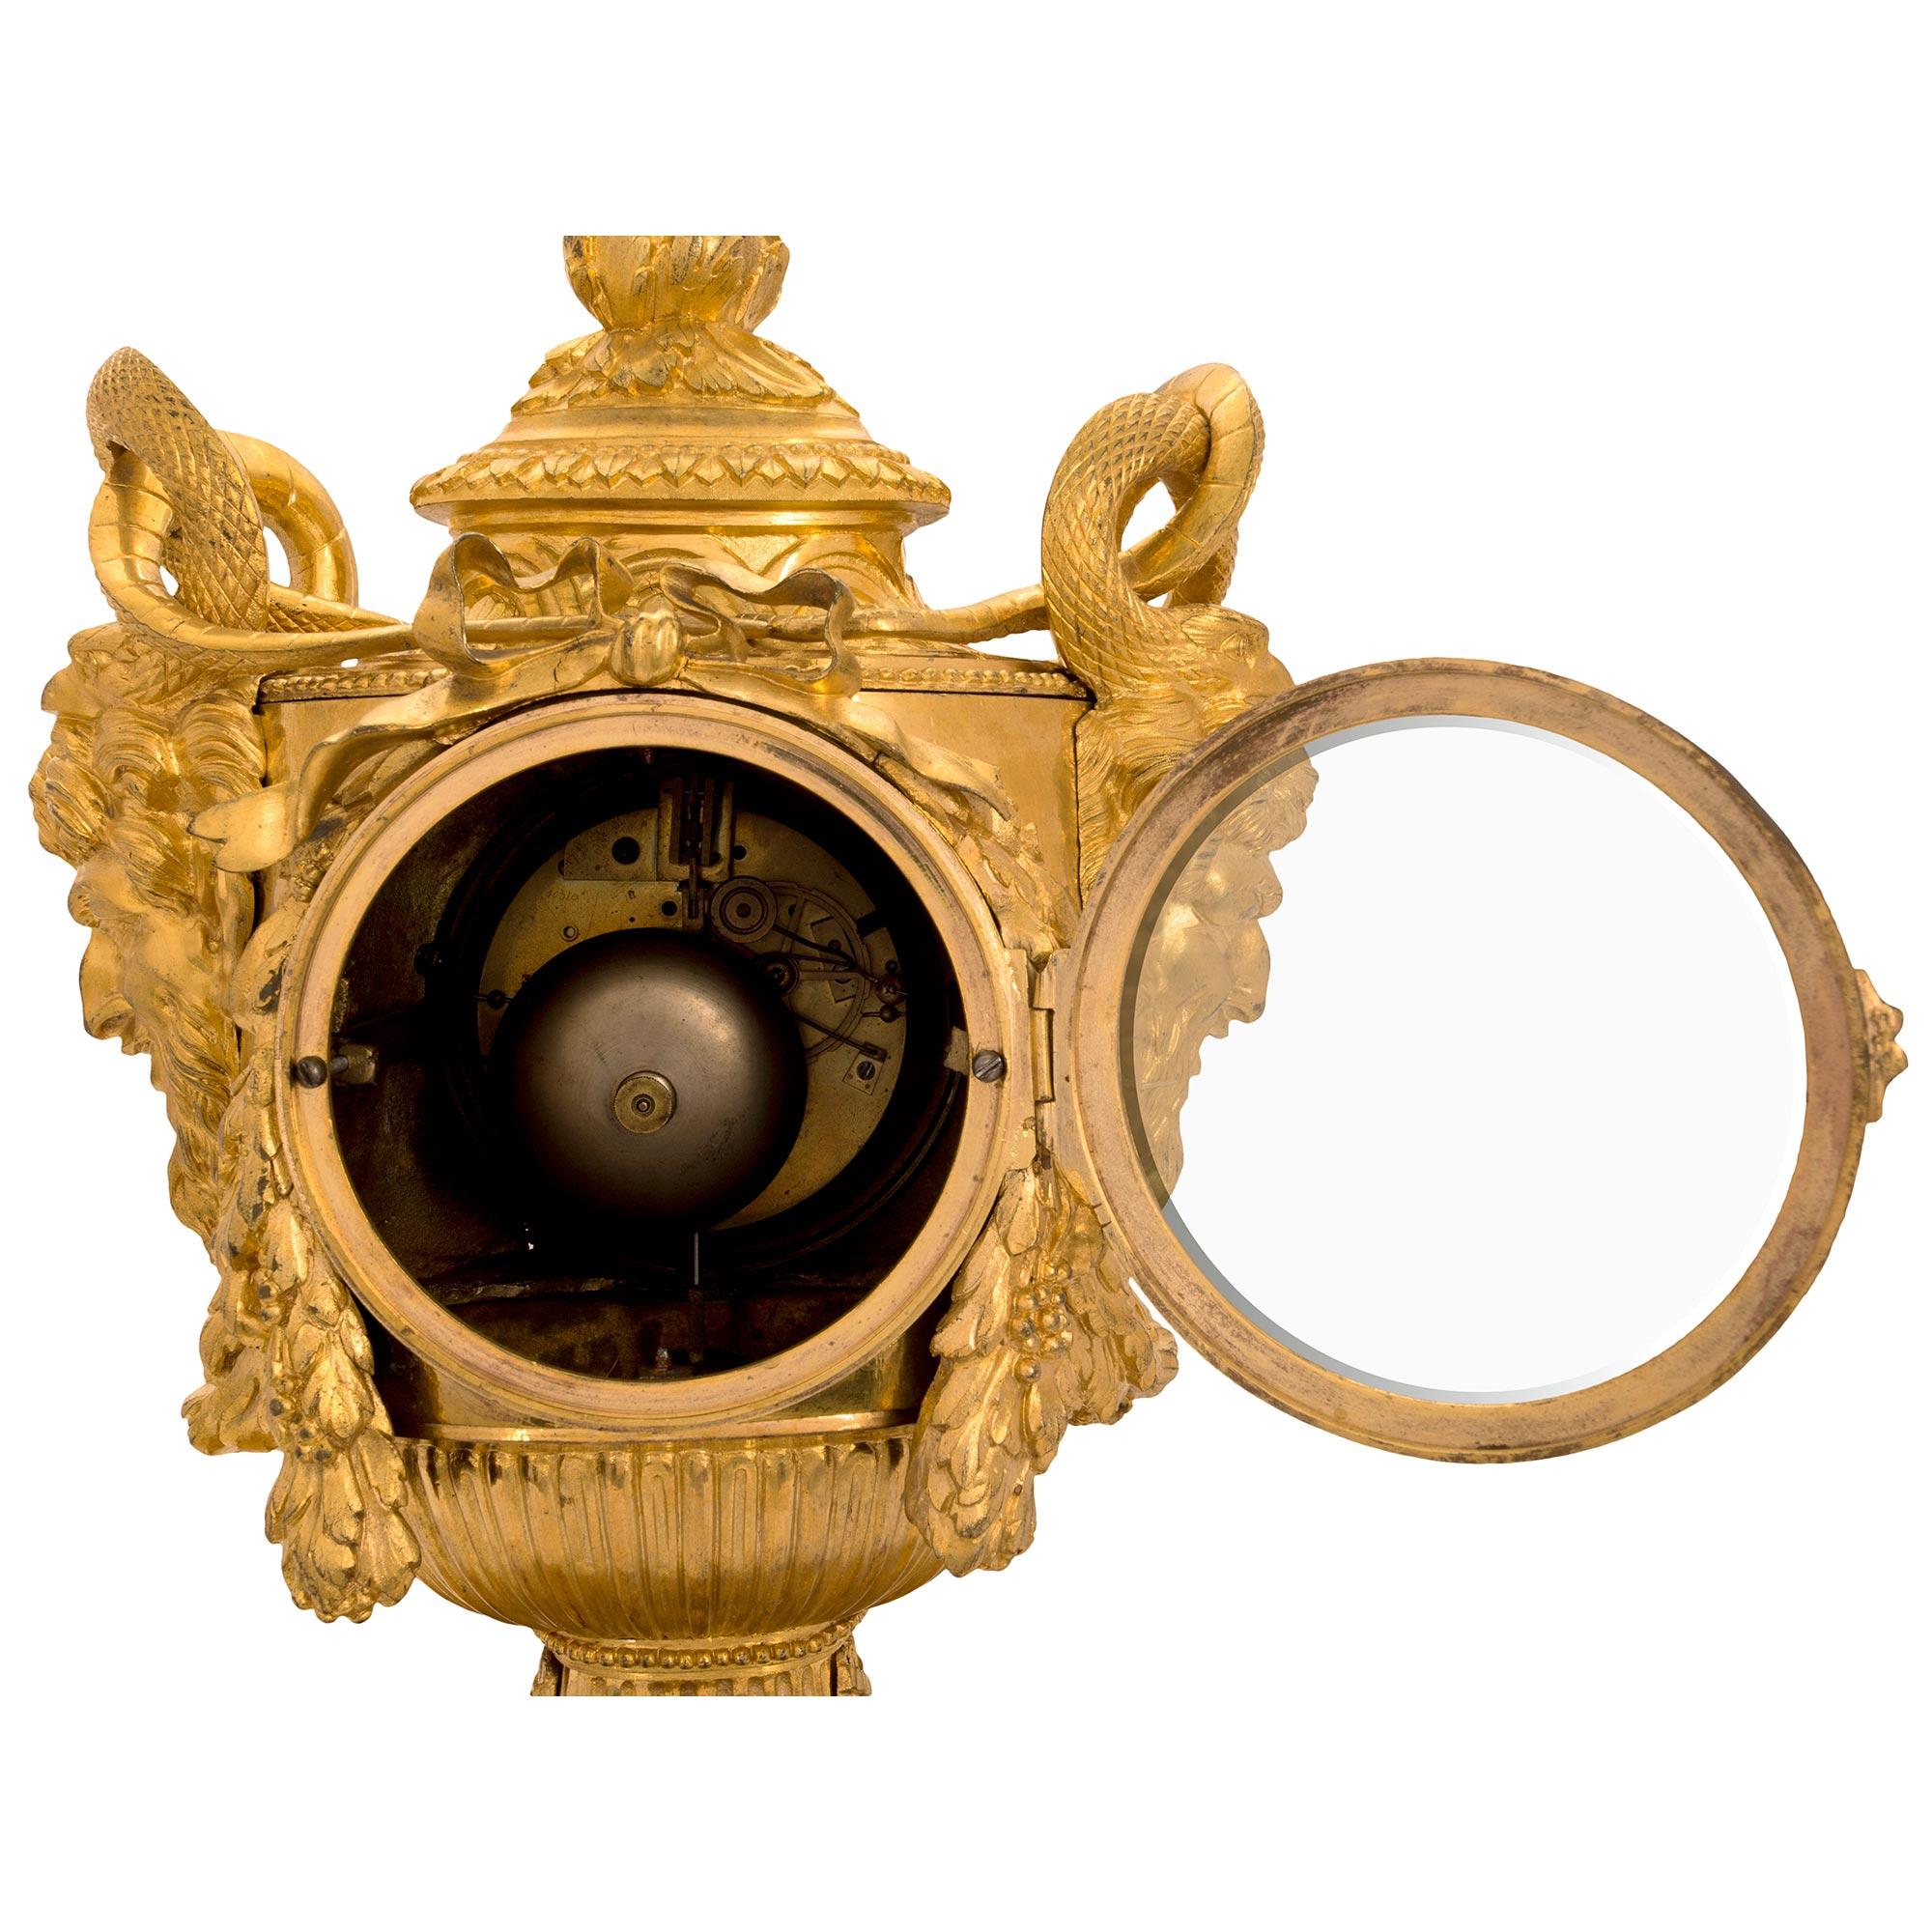 French Early 19th Century Louis XVI Style Ormolu Clock, 'Signed Lepaute Paris' For Sale 3